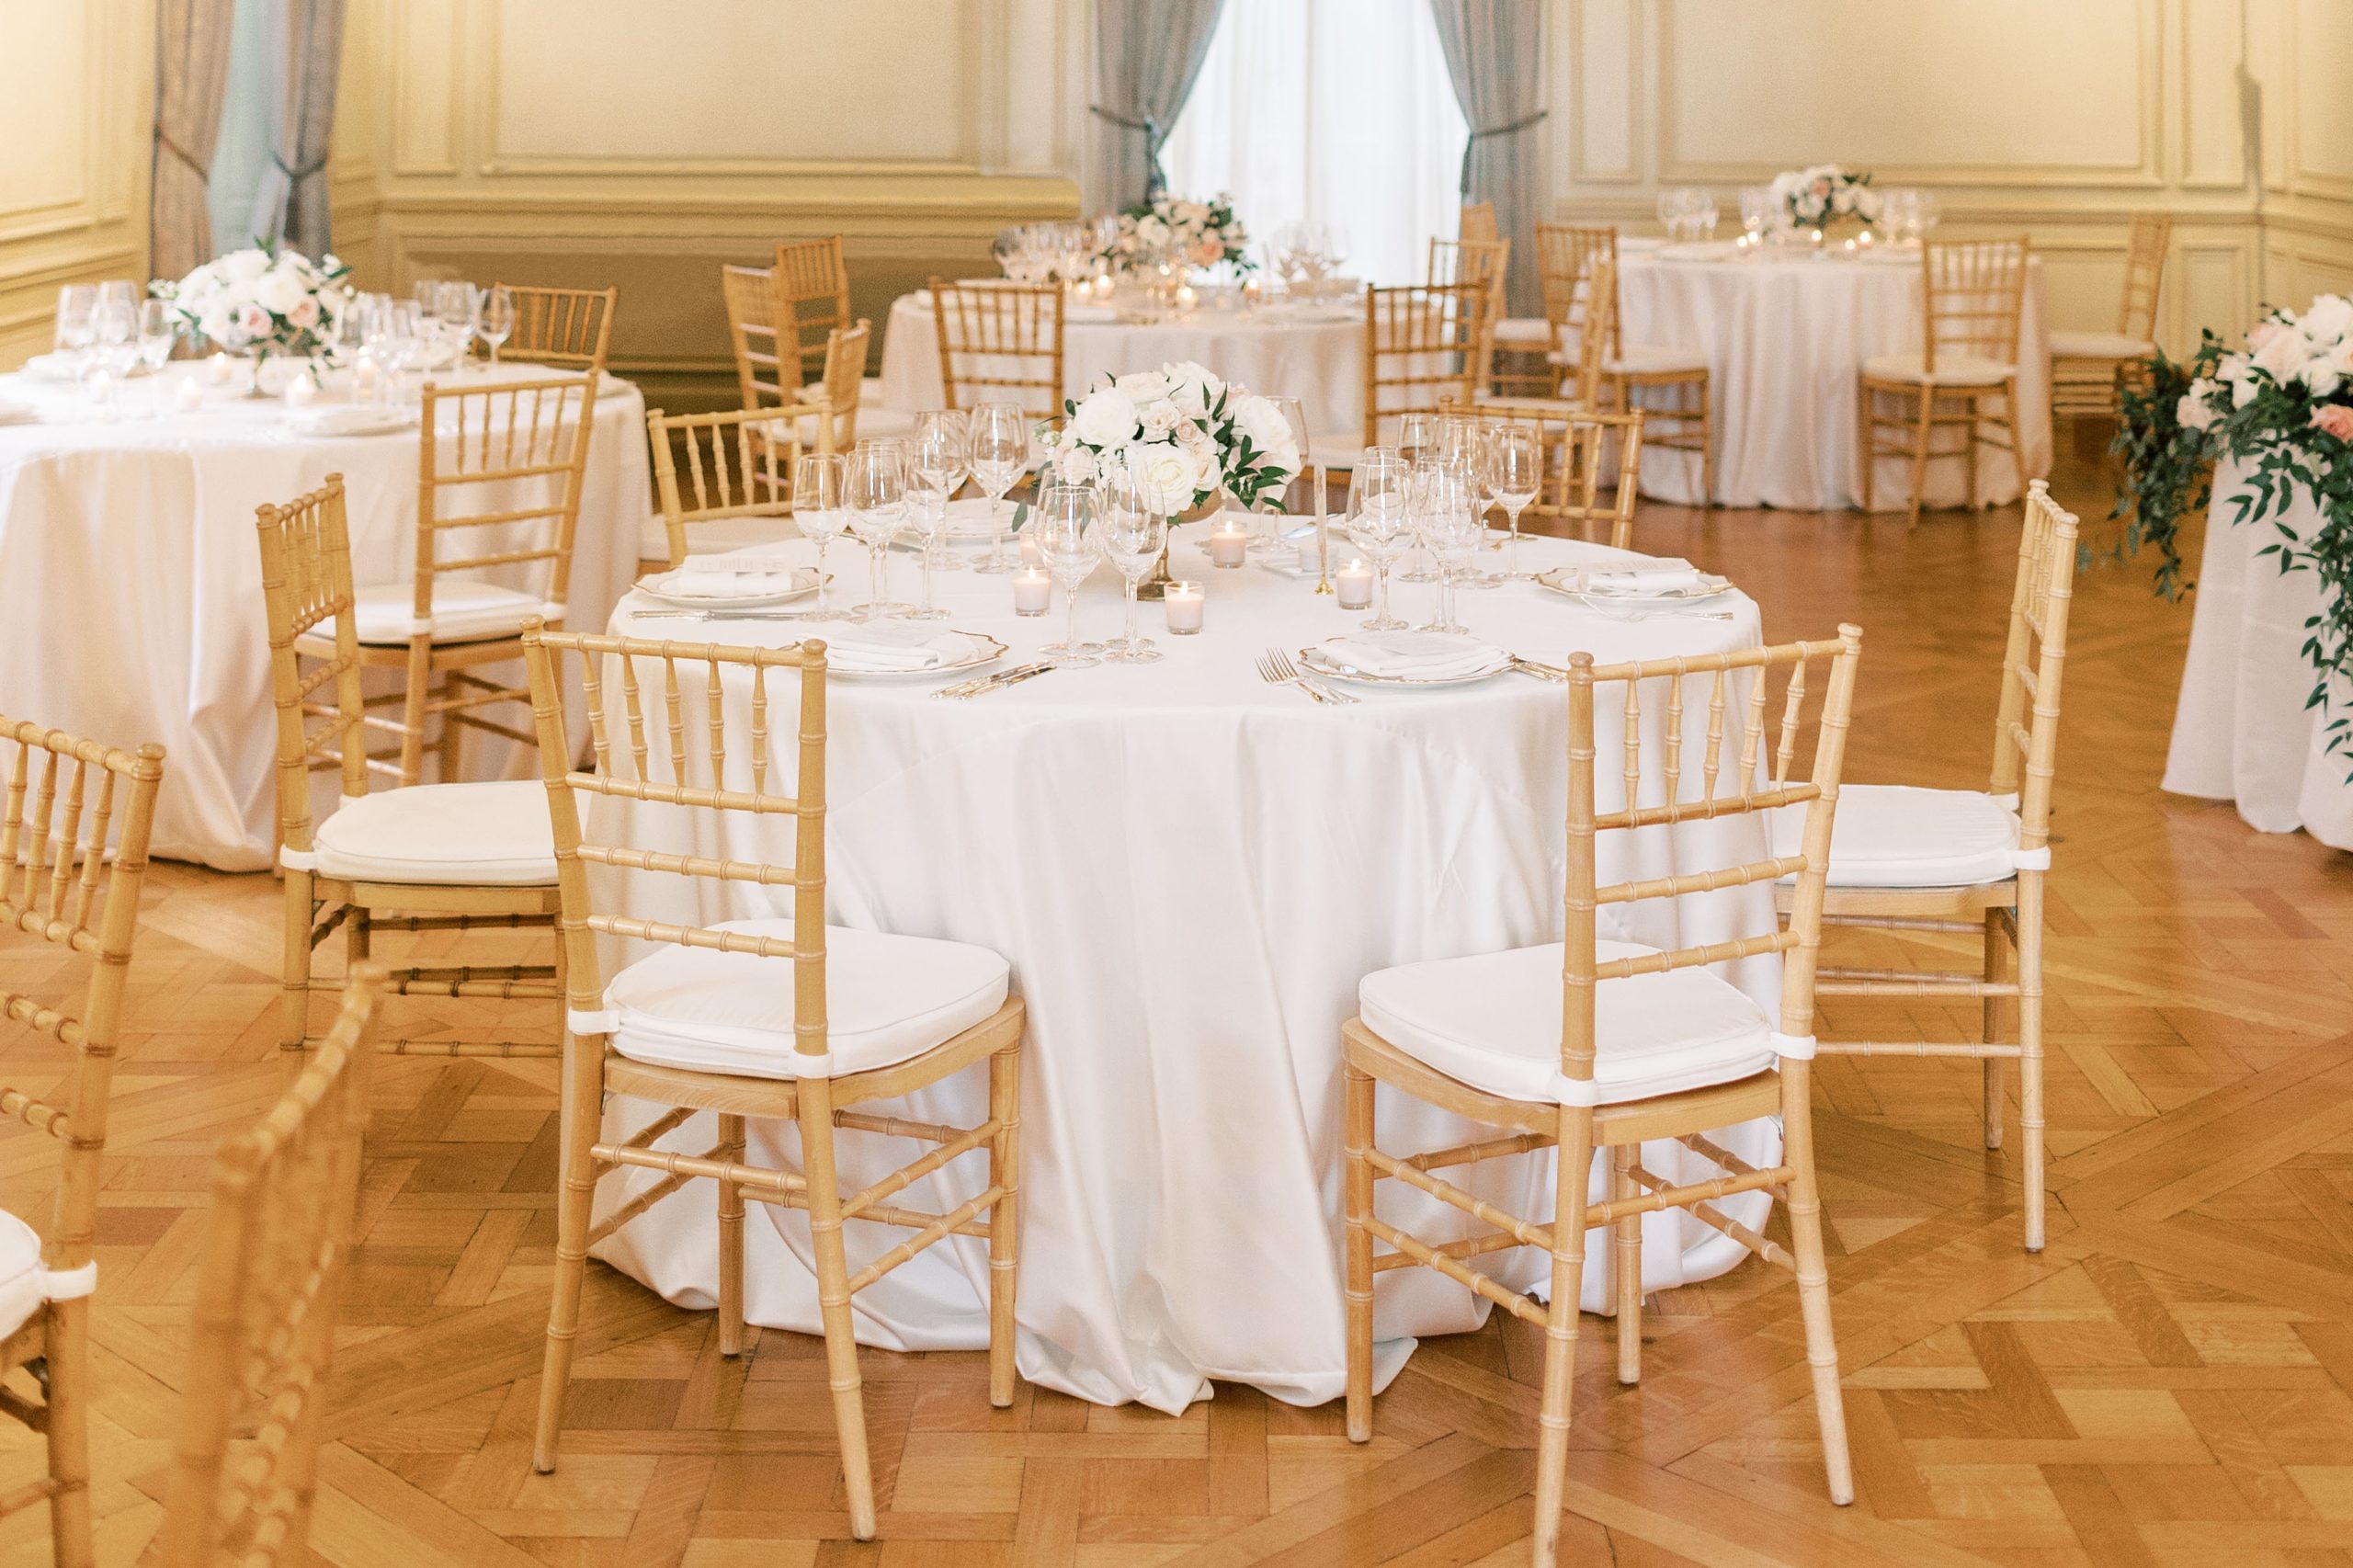 Reception at a Meridian House wedding in Washington, DC